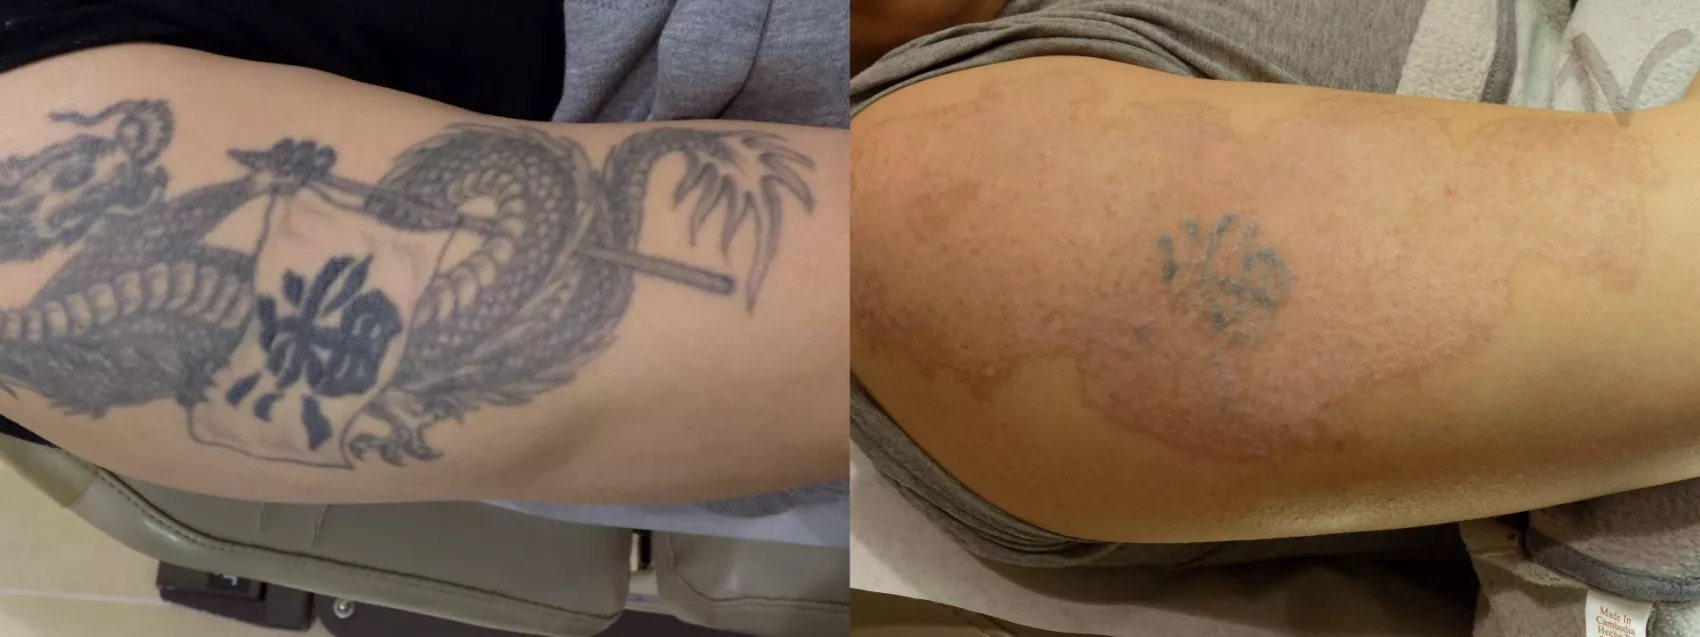 Celebrity Tattoo Removal Before and After  Tattoo for a week